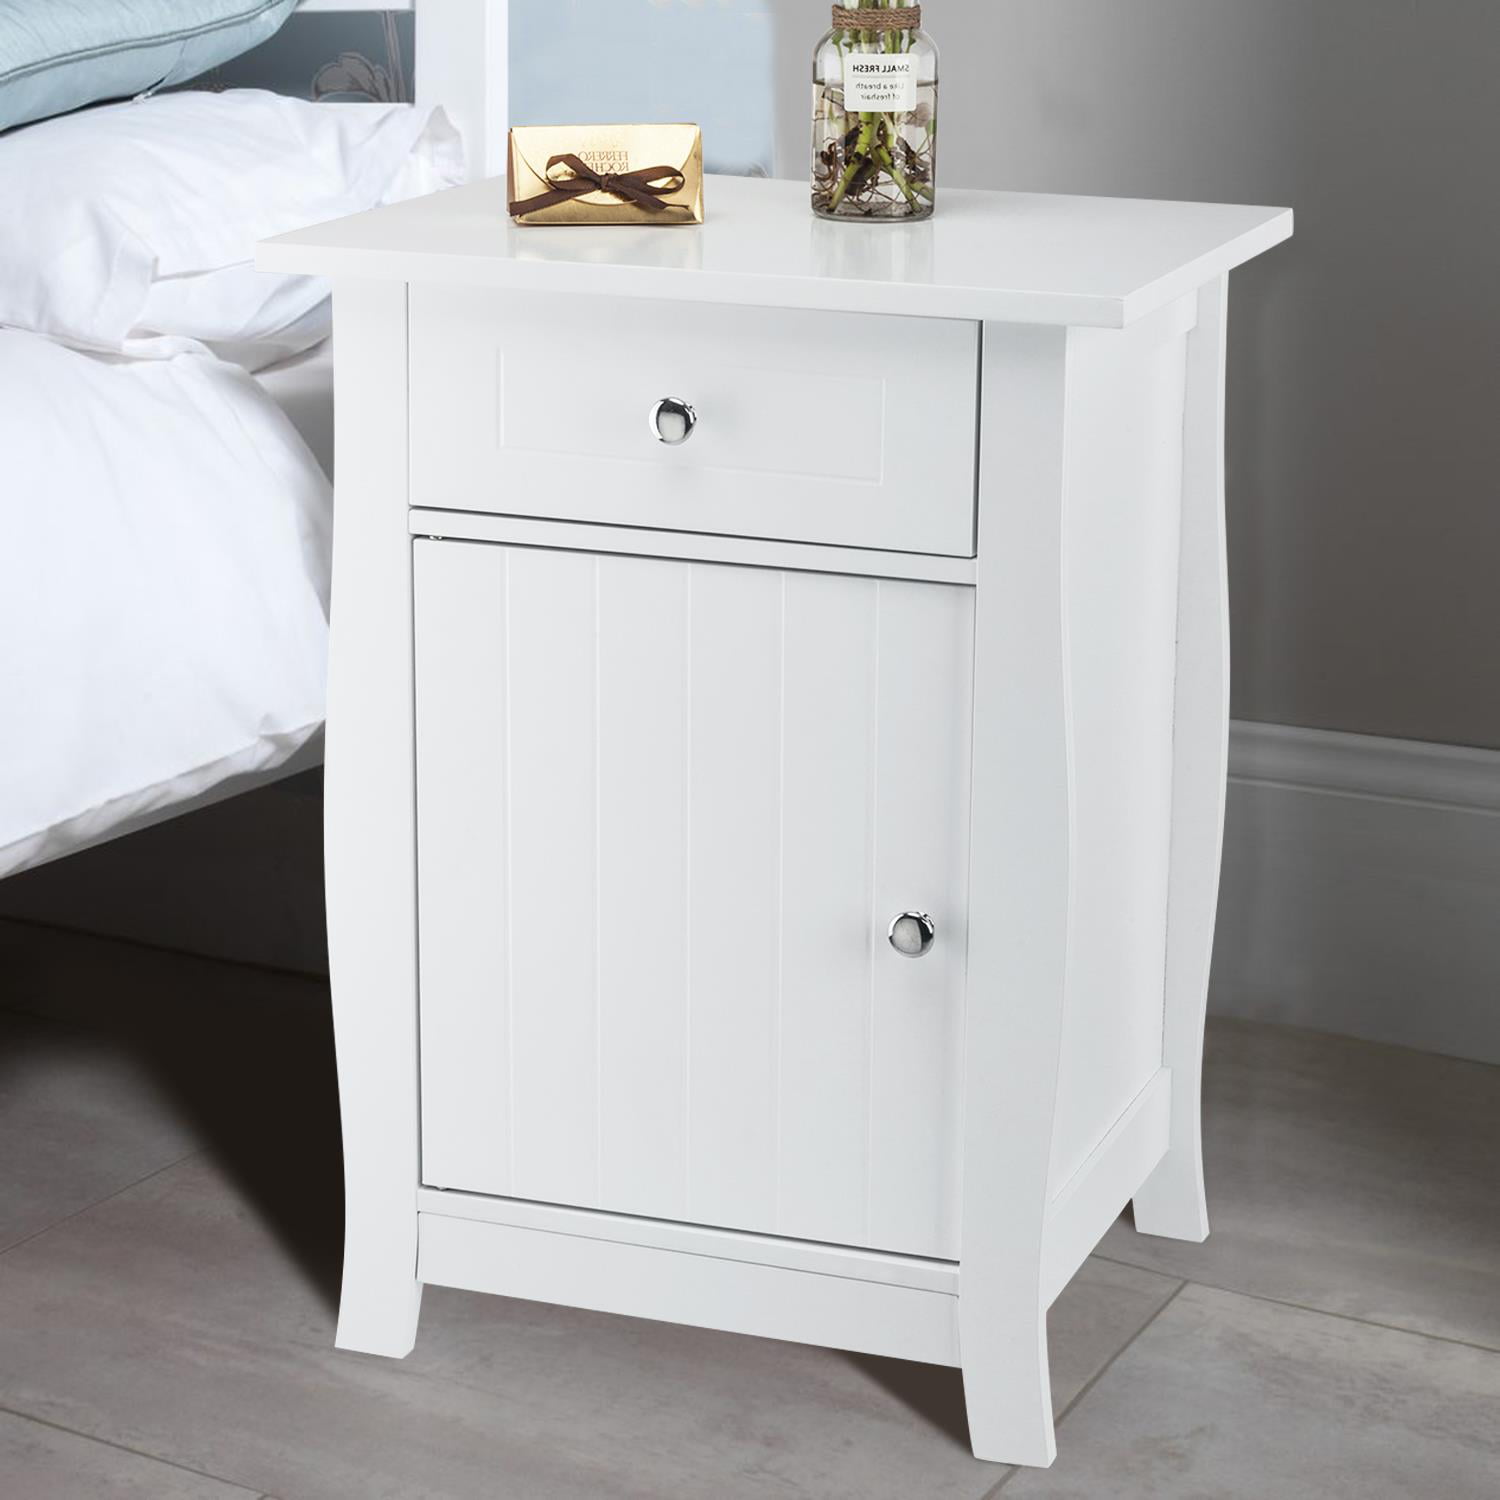 Ktaxon White Nightstand Bedside Table Wooden Accent End Table with